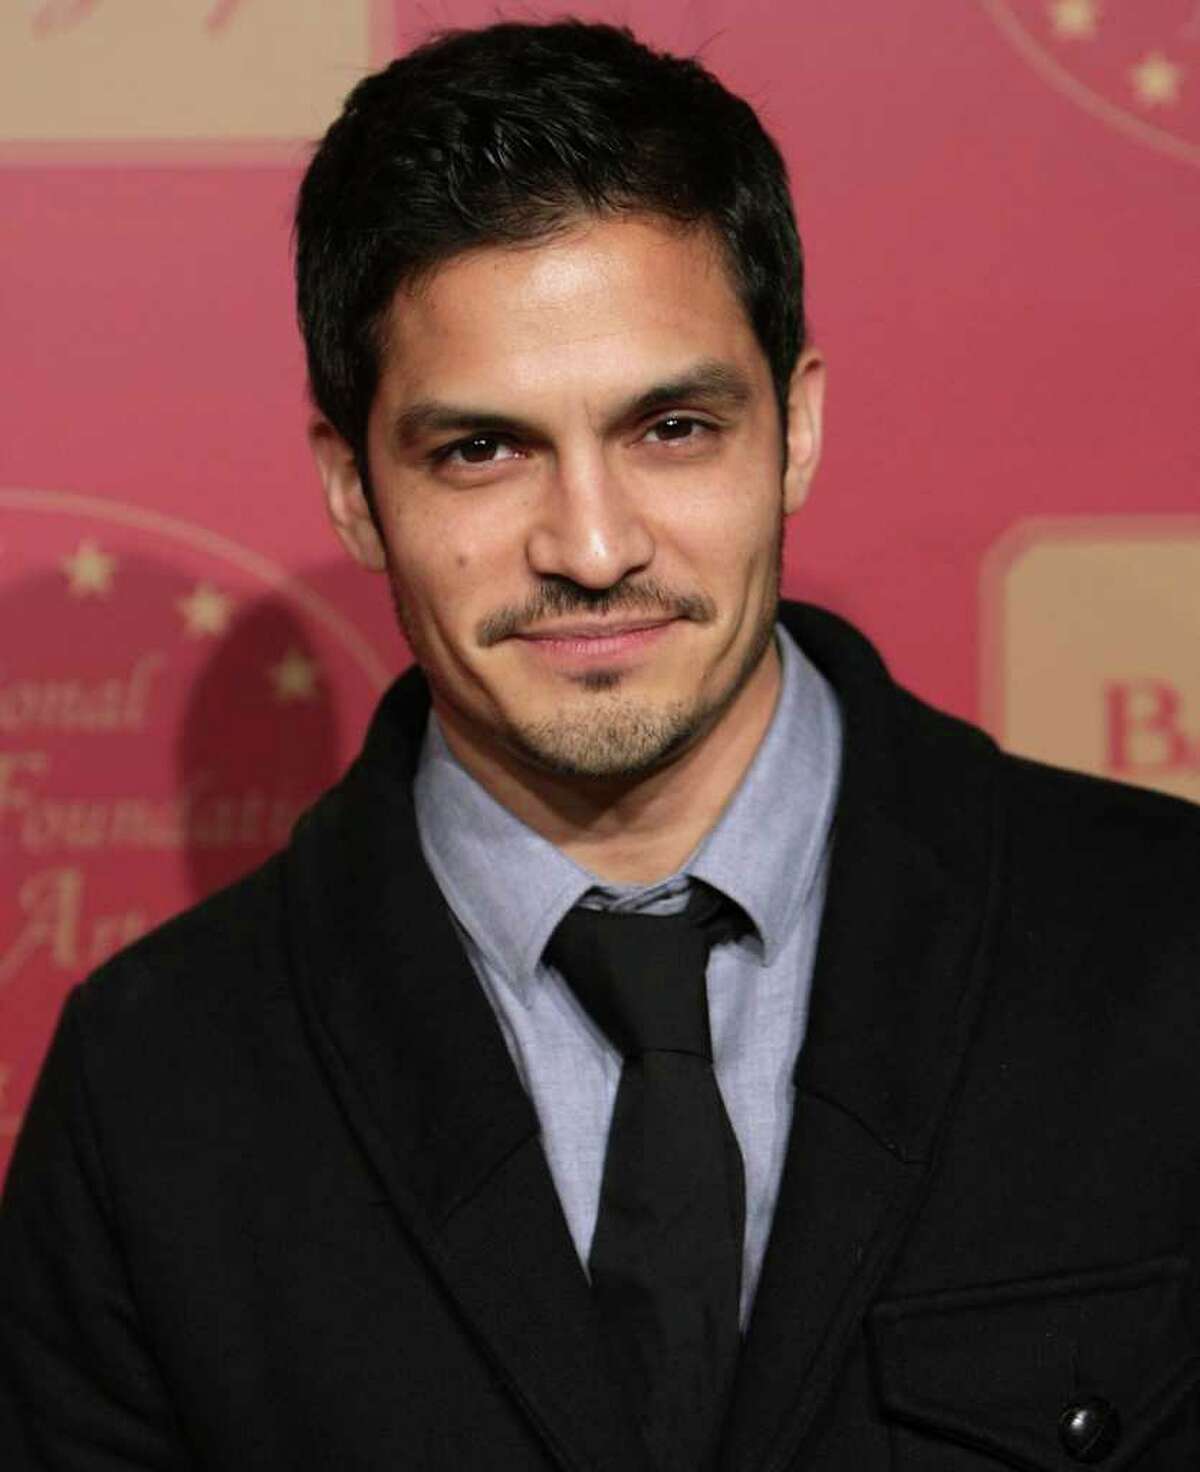 "I've never felt more sure of myself," San Antonio actor Nicholas Gonzalez says of the television roles he's accepting these days.